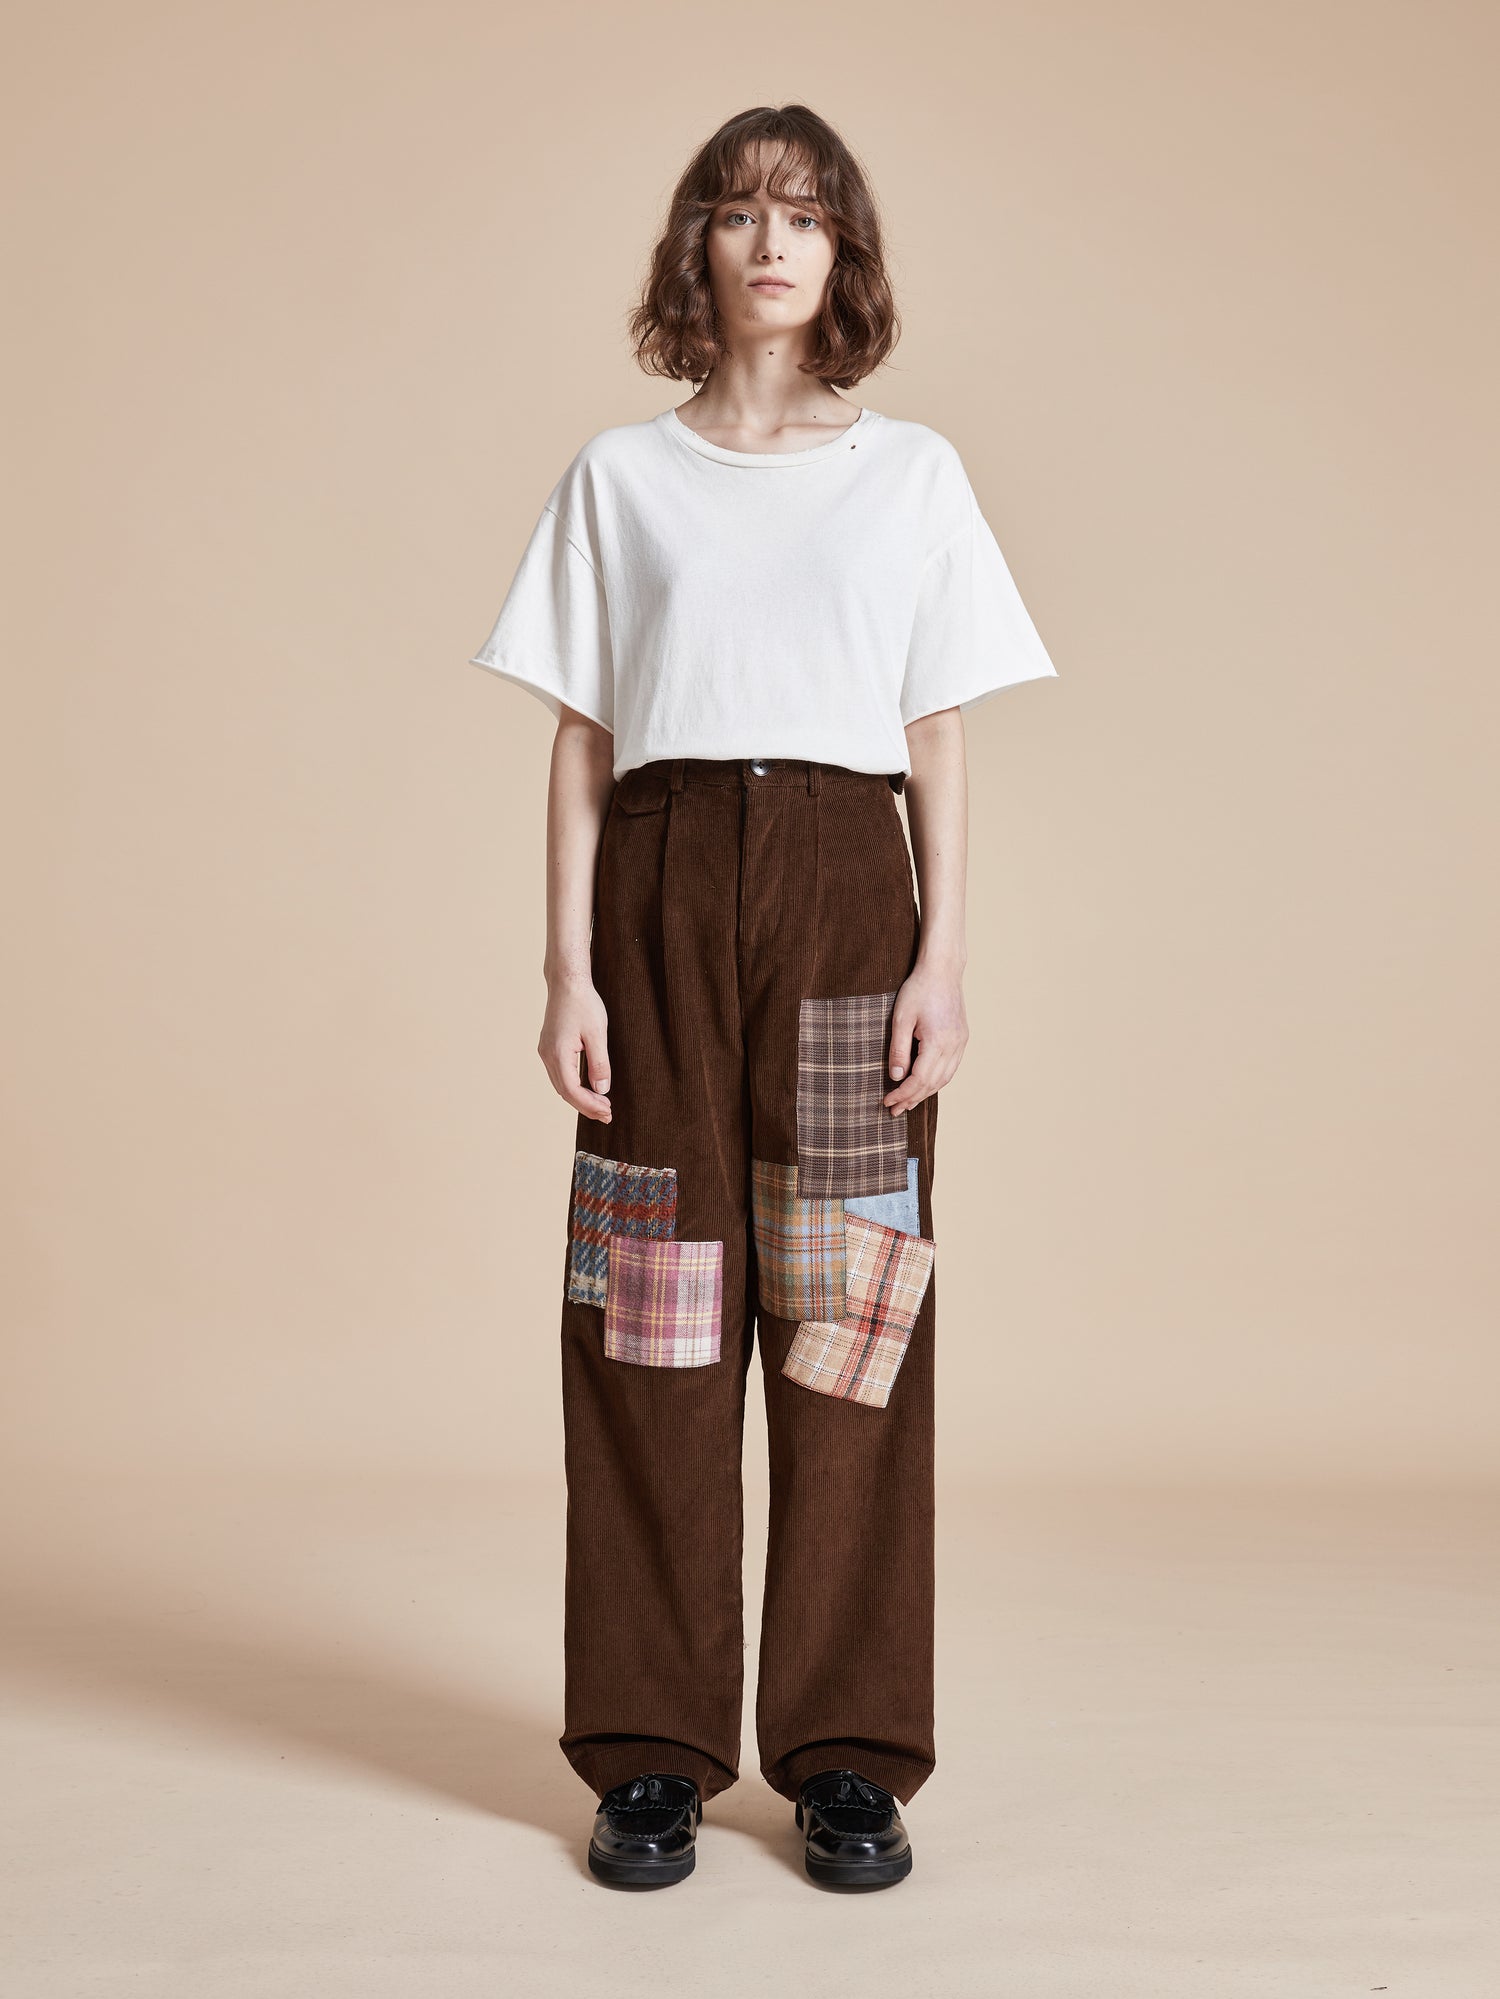 The model is wearing Found Multi-Plaid Patch Corduroy Pants with fabric patches.